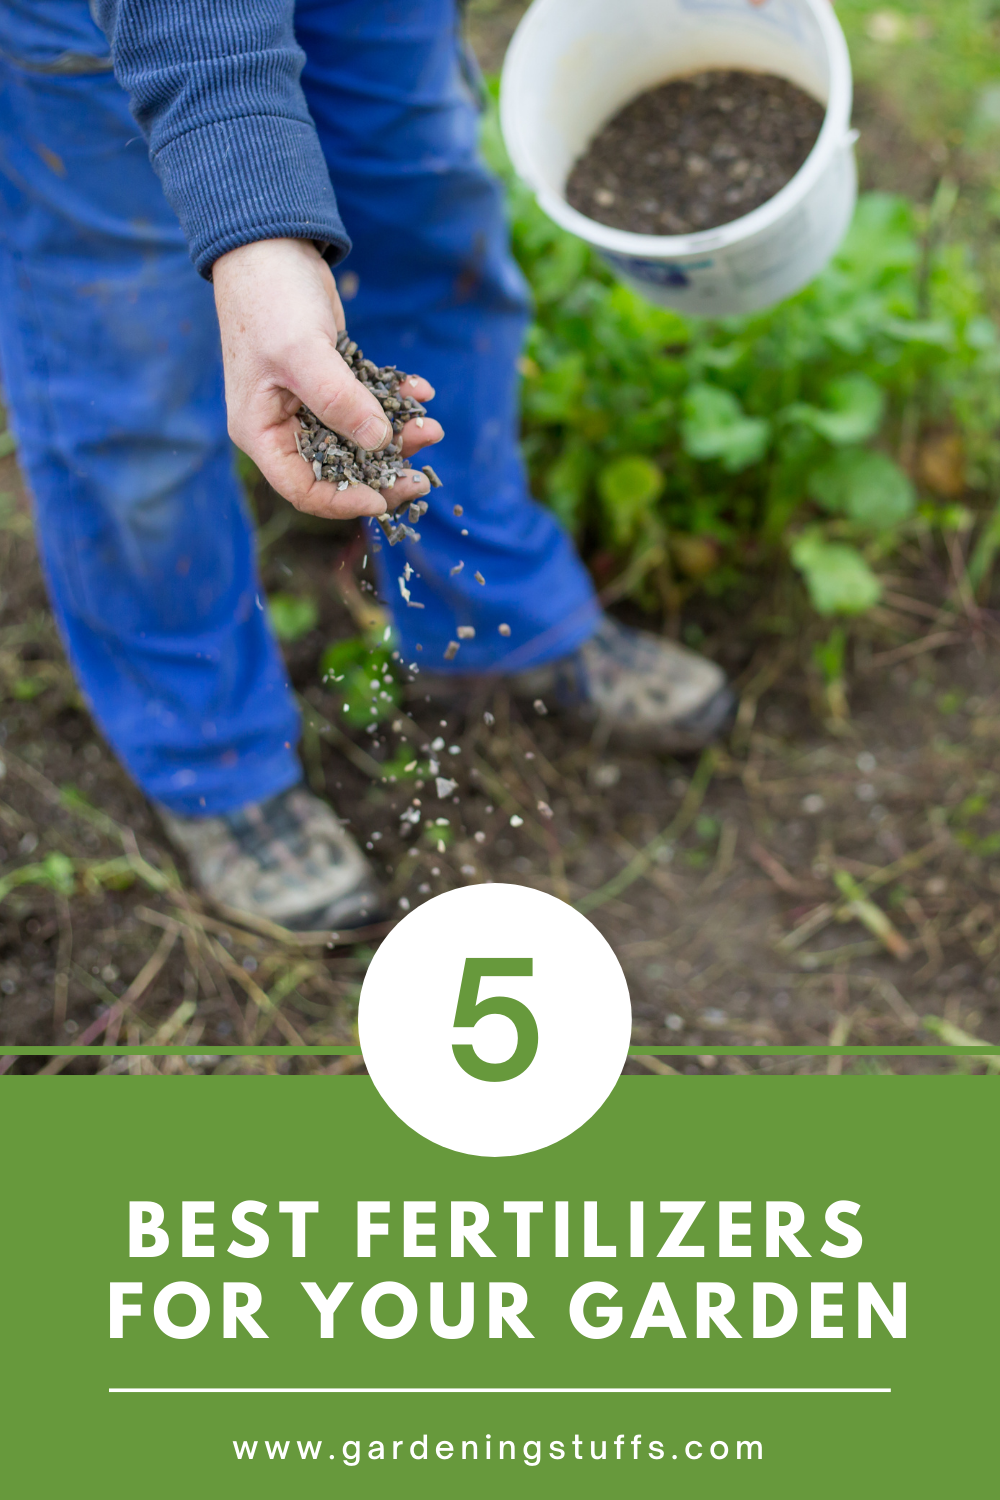 Have you ever struggled to get your flowers to bloom or had plants that were not as productive as they should be? Read on and discover the best garden fertilizers, along with what to look out for.